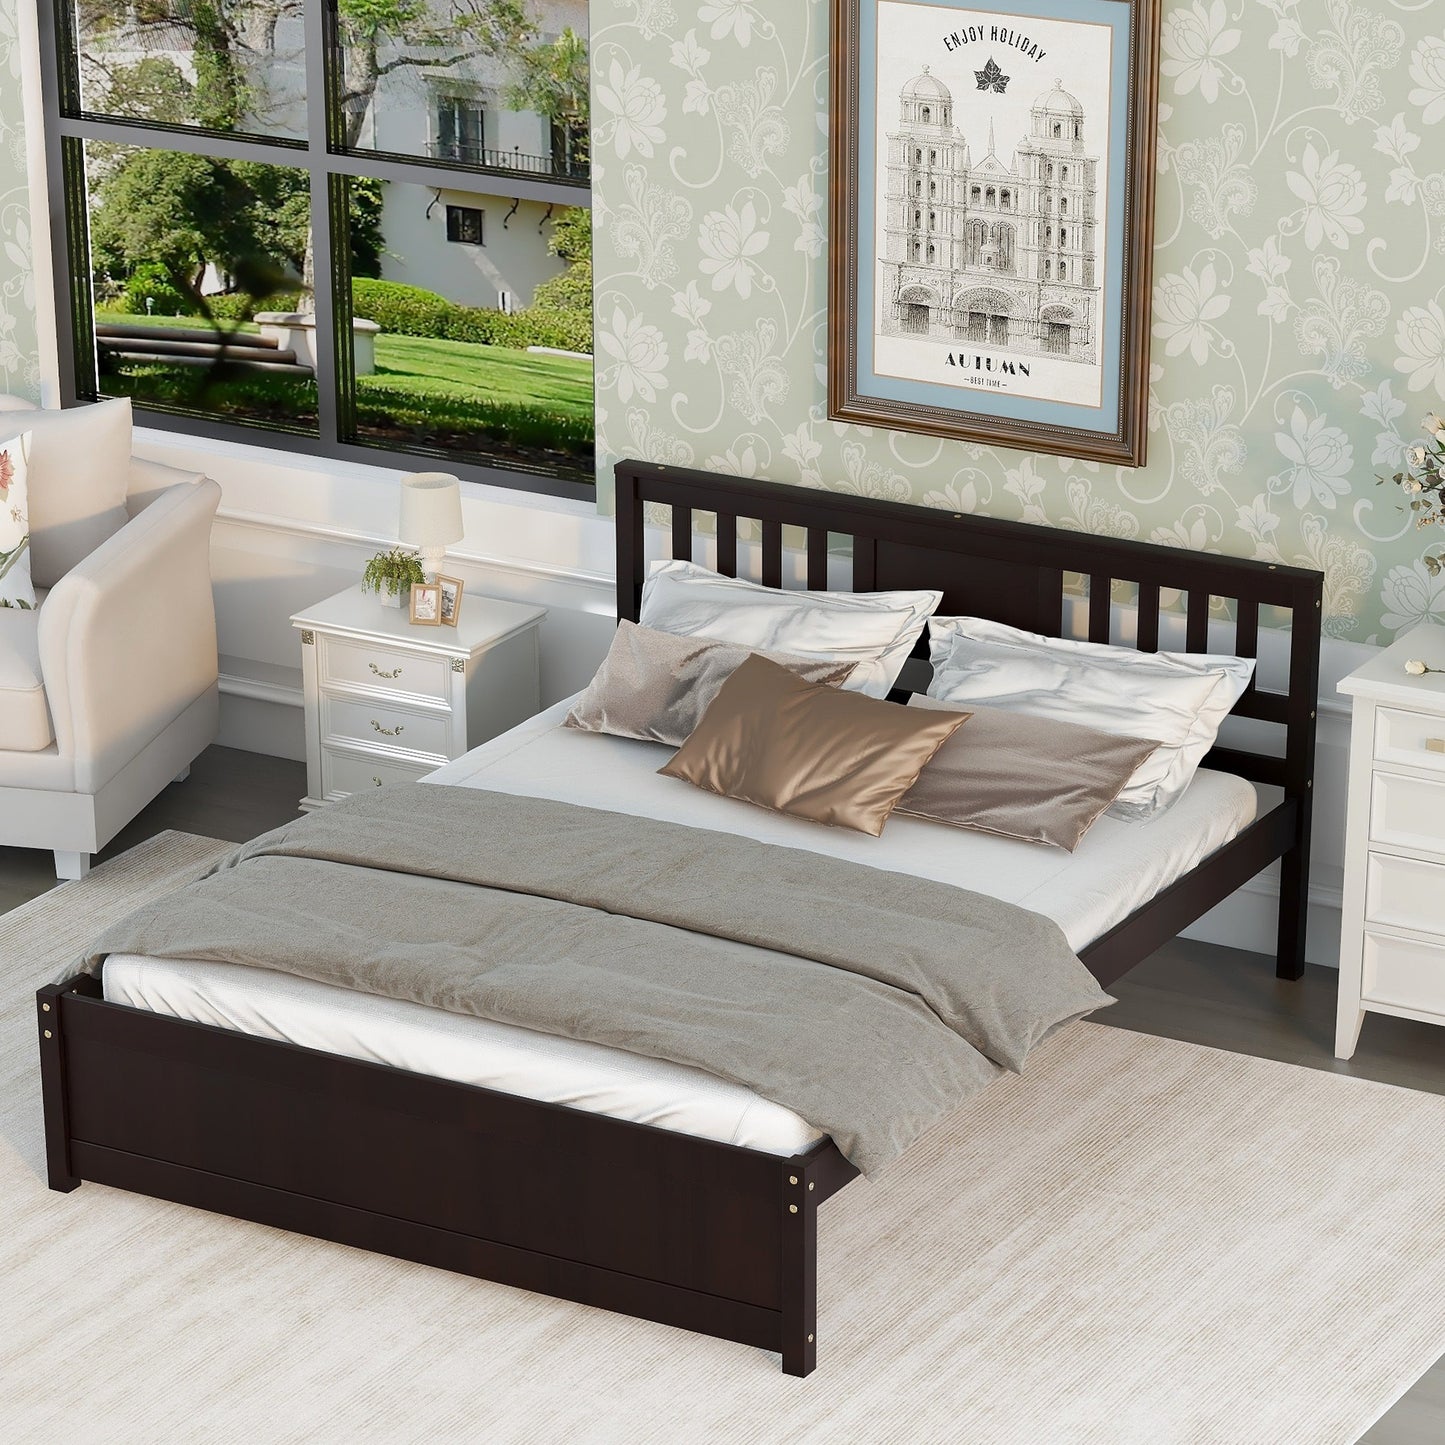 Syngar King Size Platform Bed with Headboard, Solid Wood Frame with Headboard, 800 Lbs. Weight Capacity, White, LJ2093